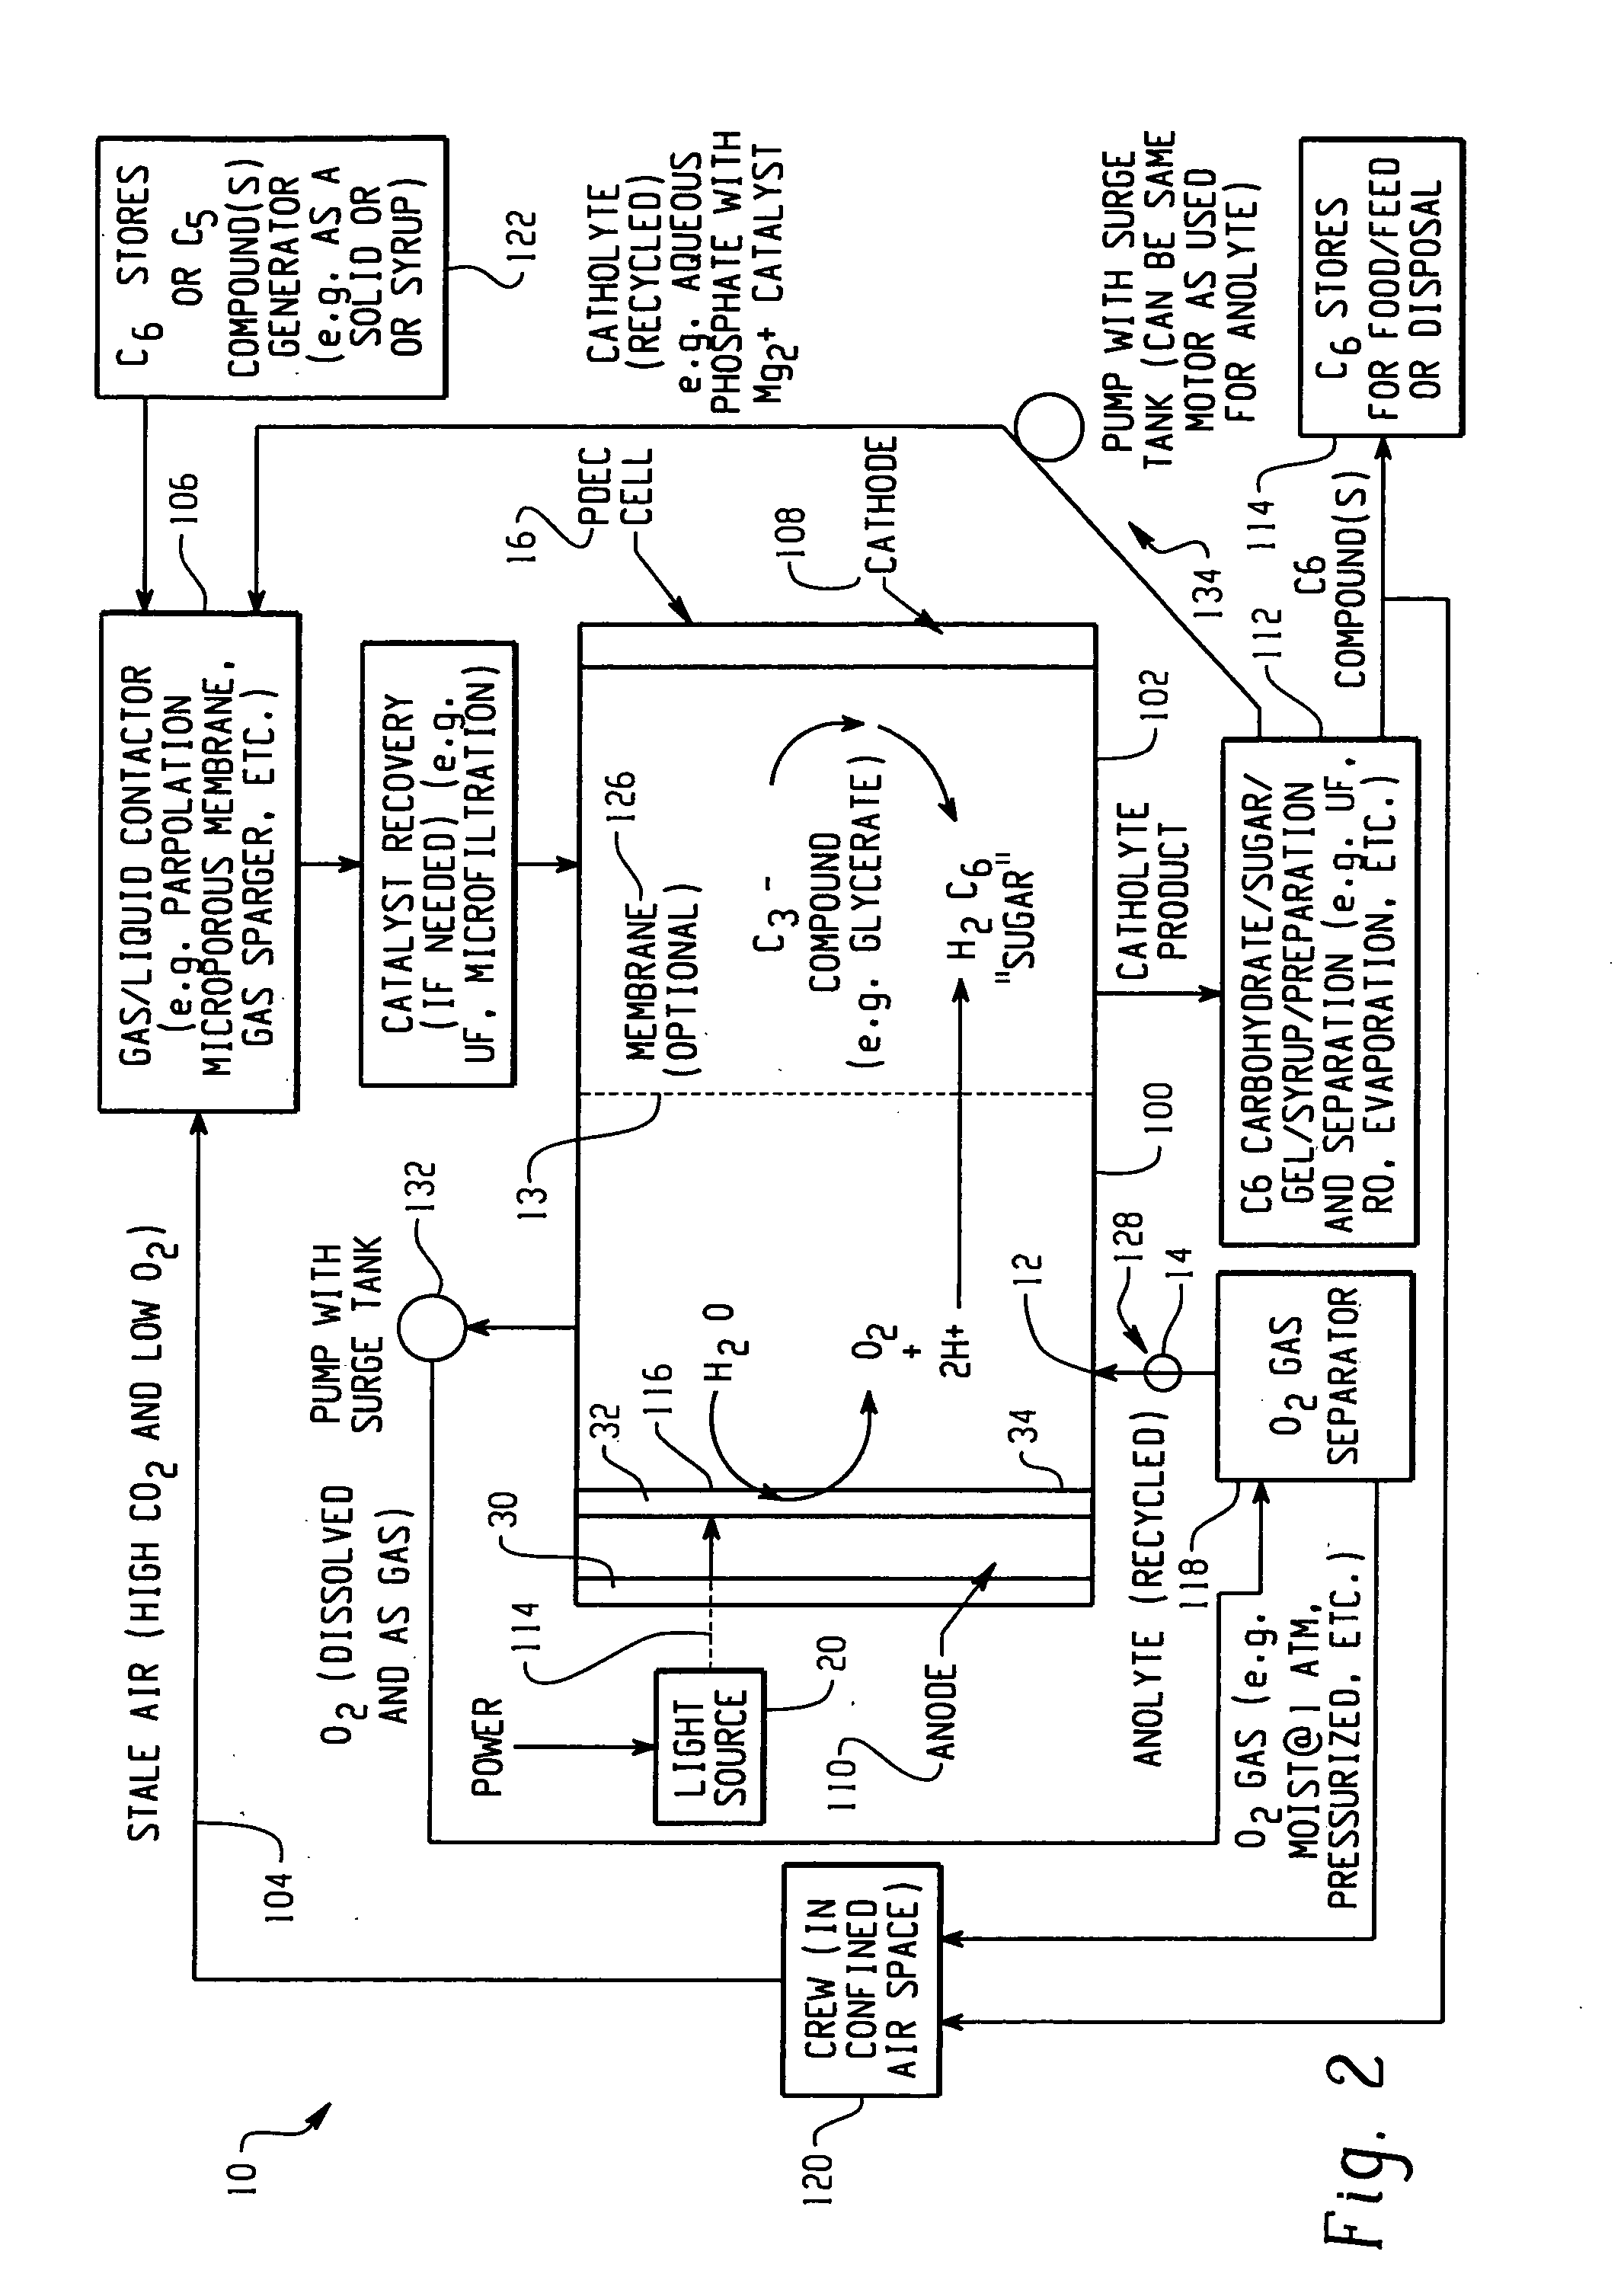 Photolytic oxygenator with carbon dioxide fixation and separation